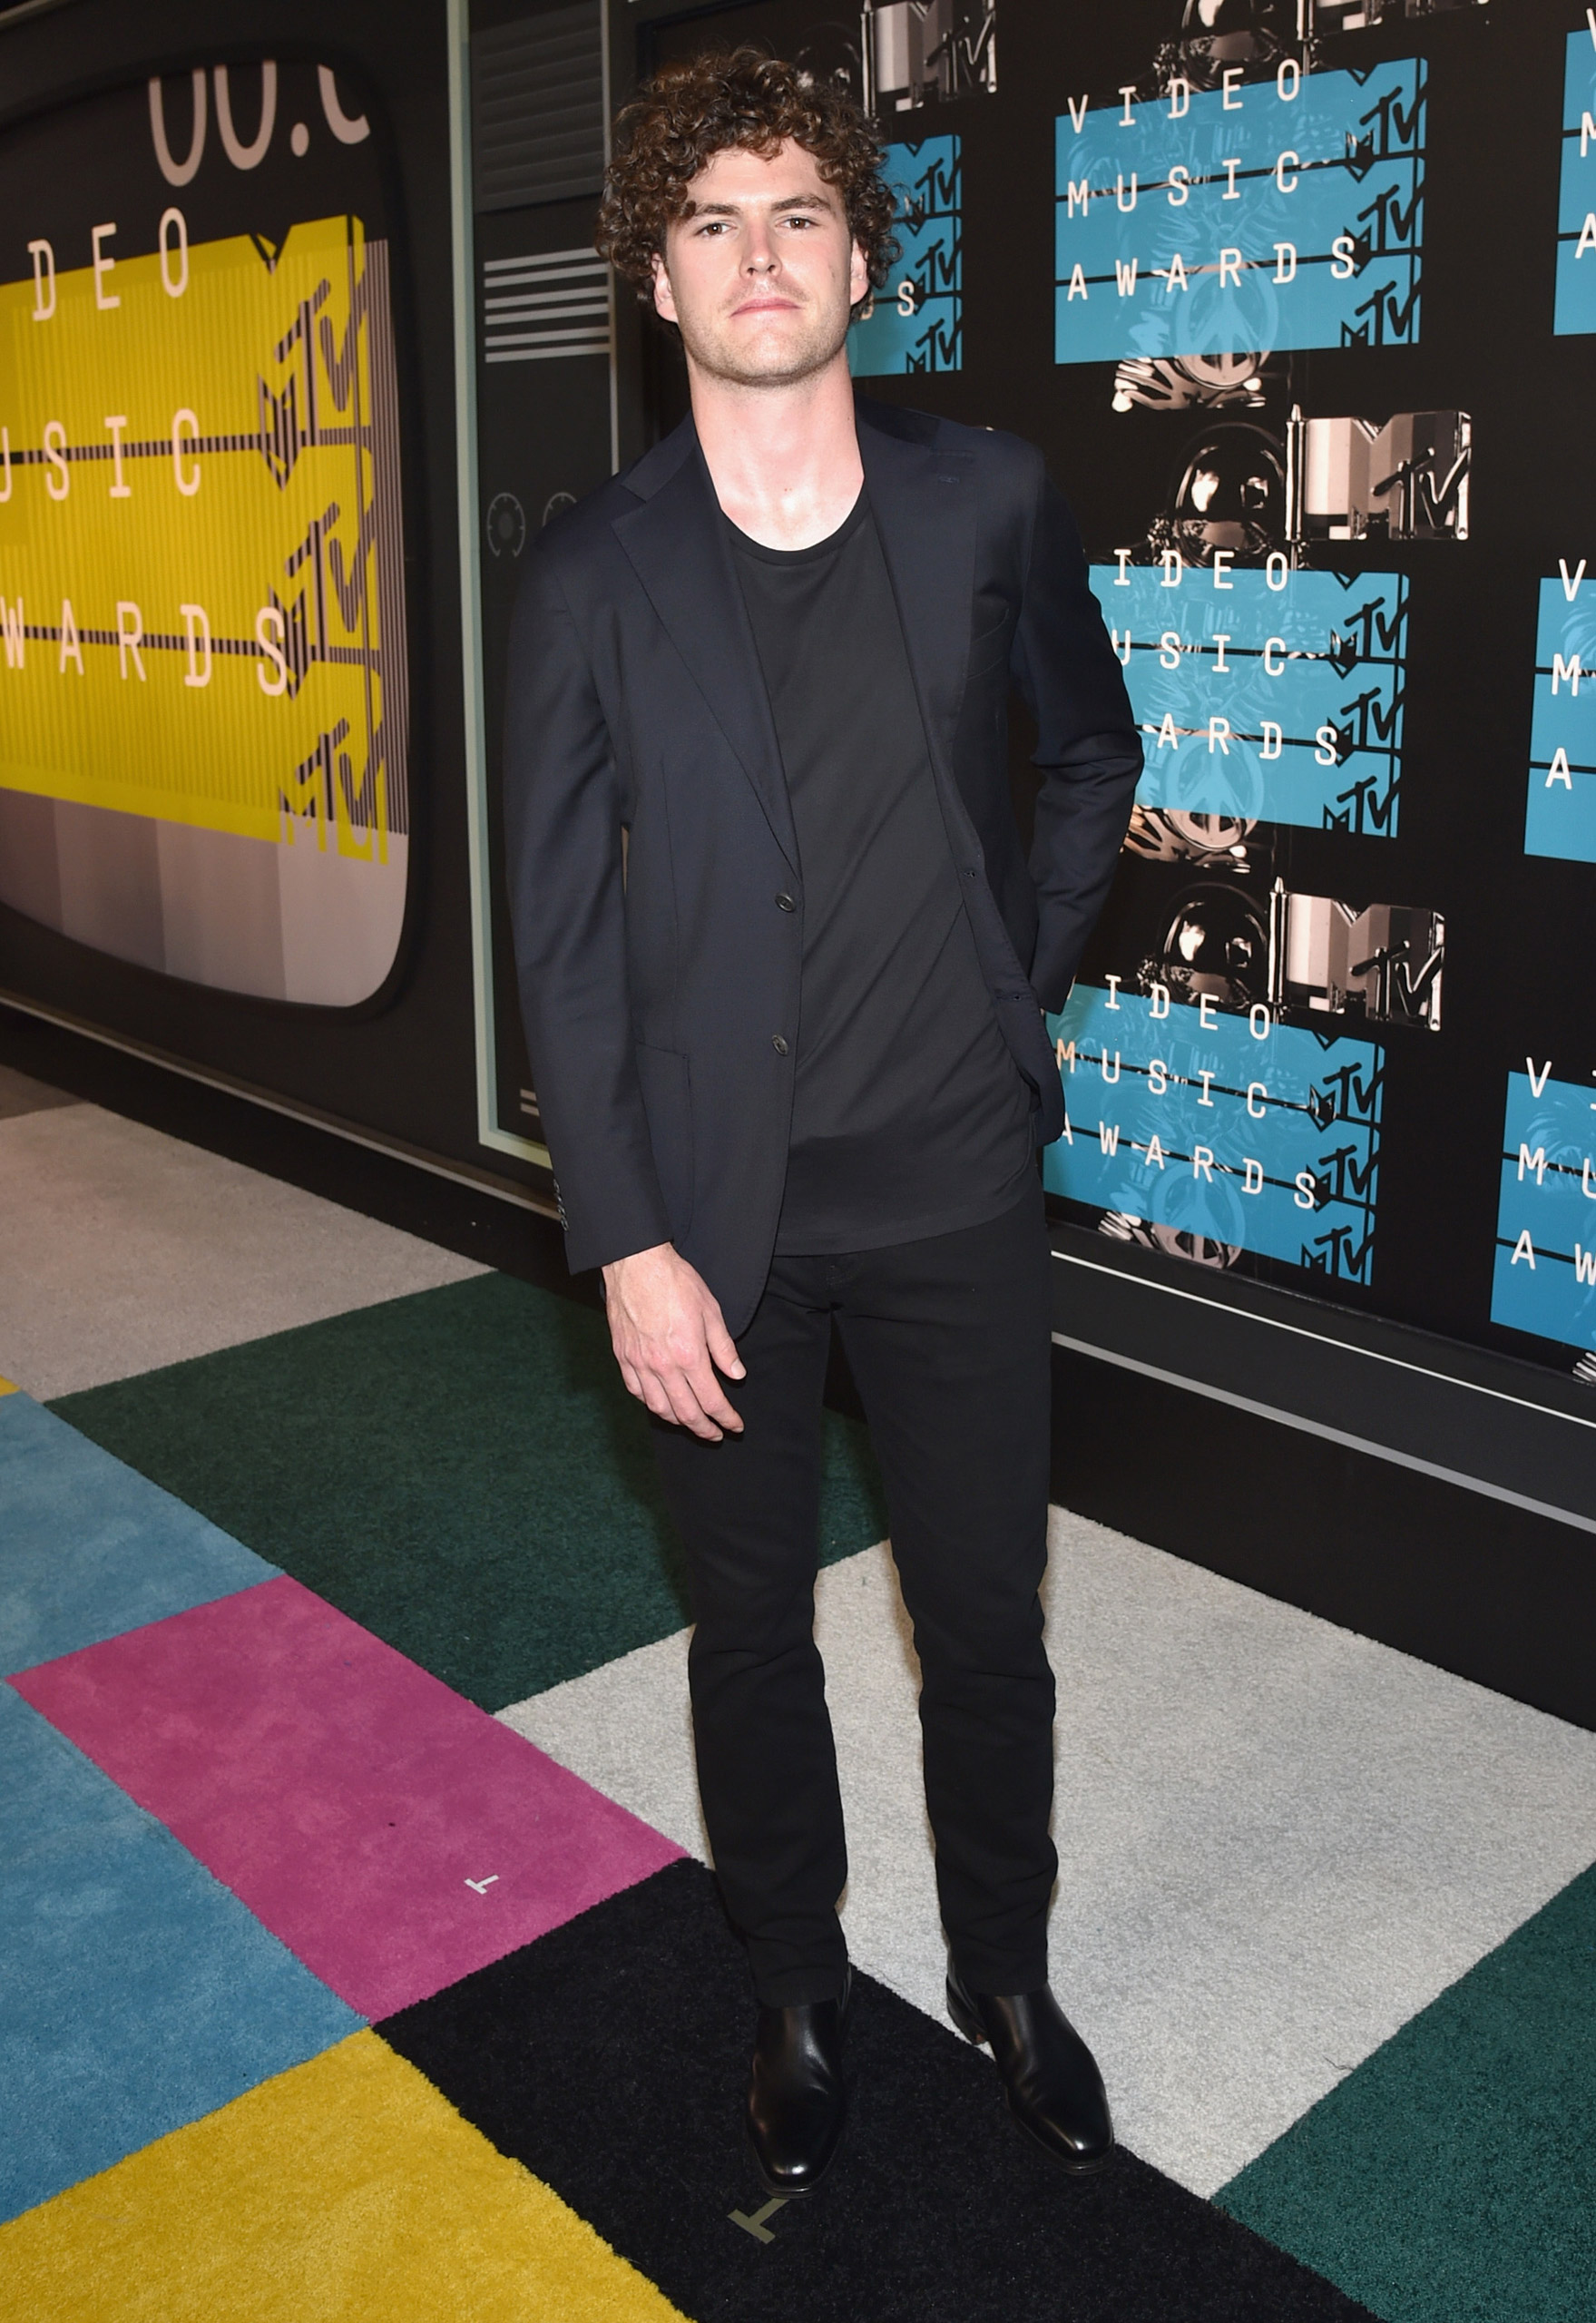 LOS ANGELES, CA - AUGUST 30: Musician Vance Joy attends the 2015 MTV Video Music Awards at Microsoft Theater on August 30, 2015 in Los Angeles, California. (Photo by John Shearer/Getty Images)